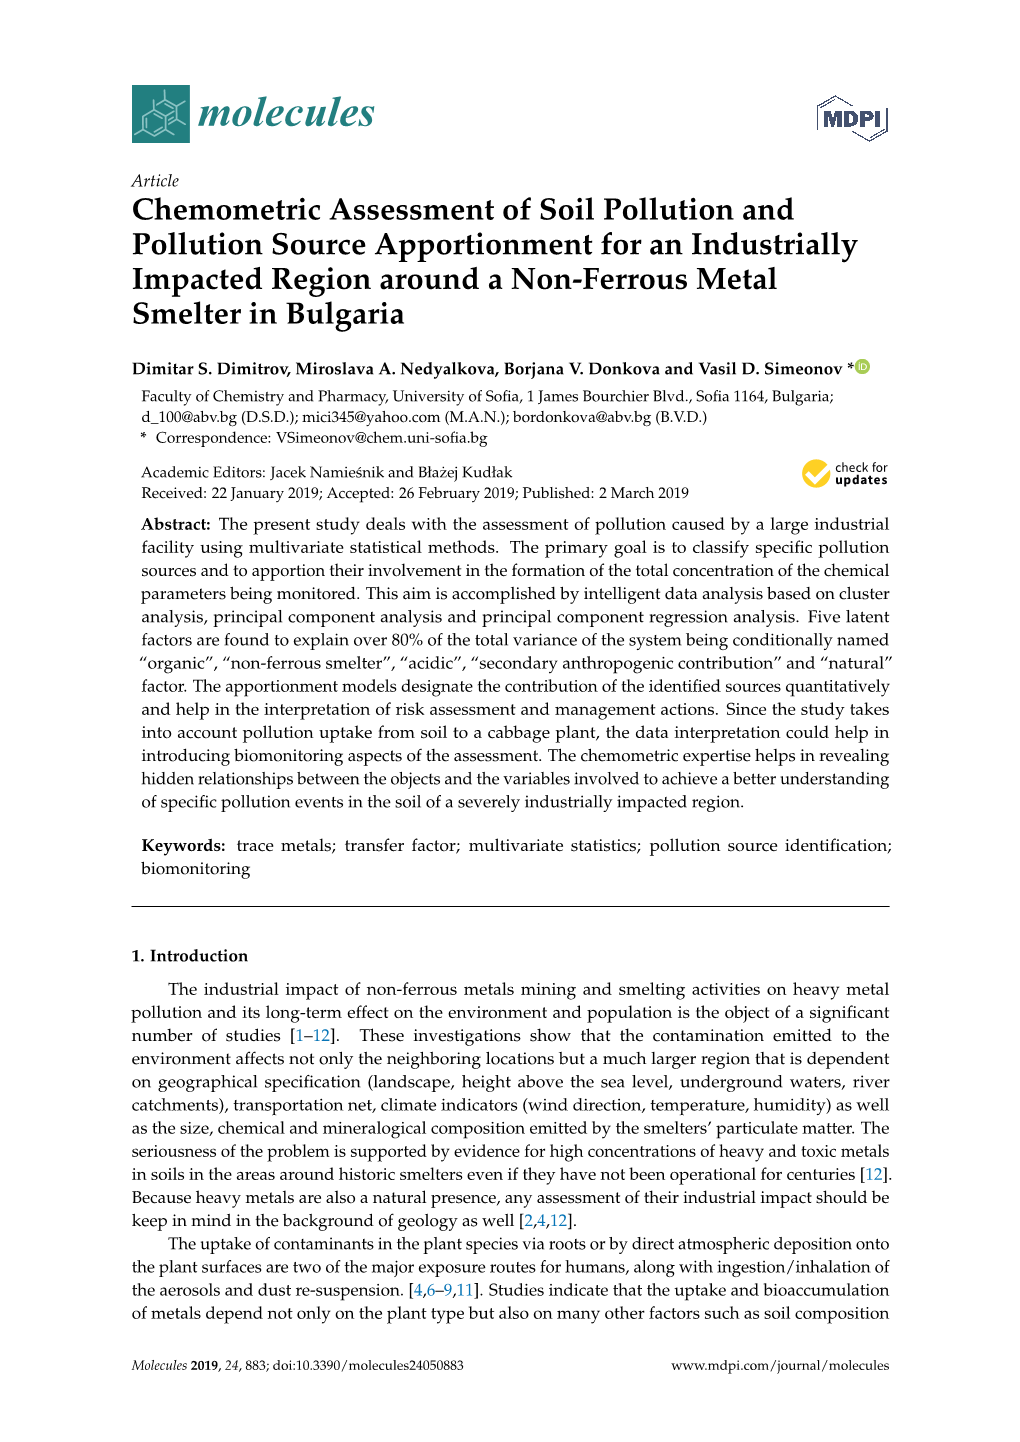 Chemometric Assessment of Soil Pollution and Pollution Source Apportionment for an Industrially Impacted Region Around a Non-Ferrous Metal Smelter in Bulgaria